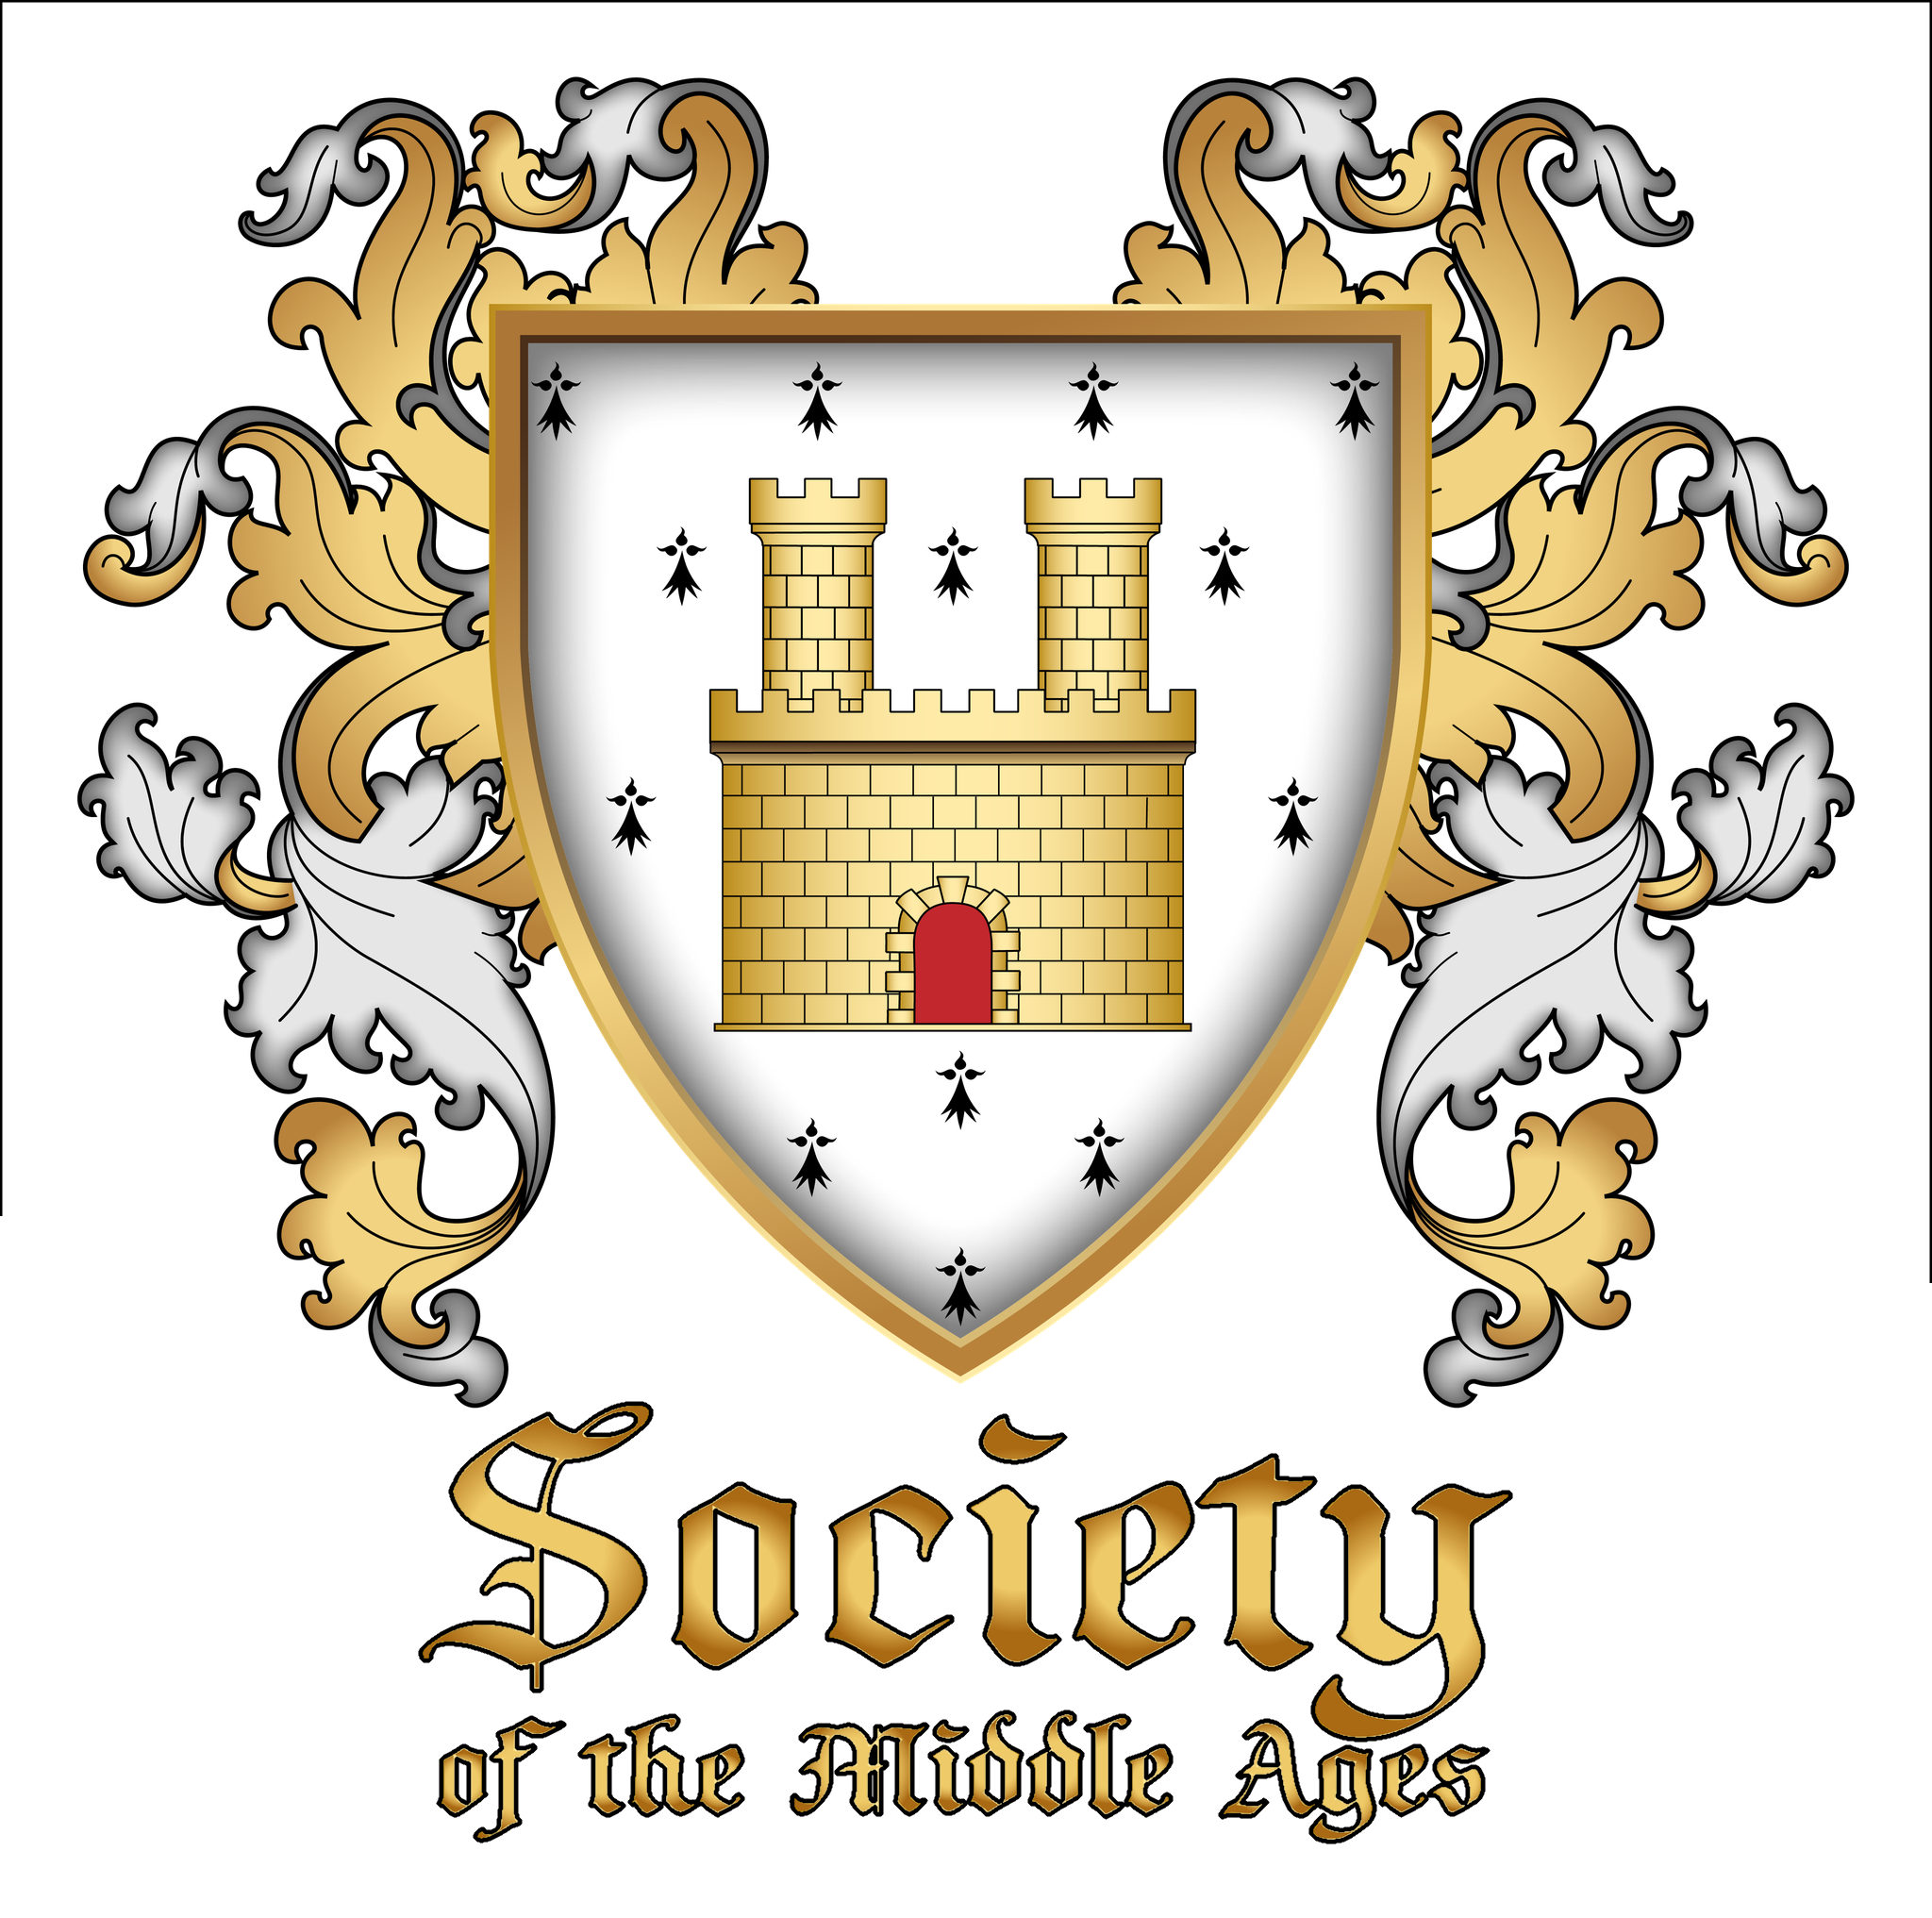 Society of the Middle Ages